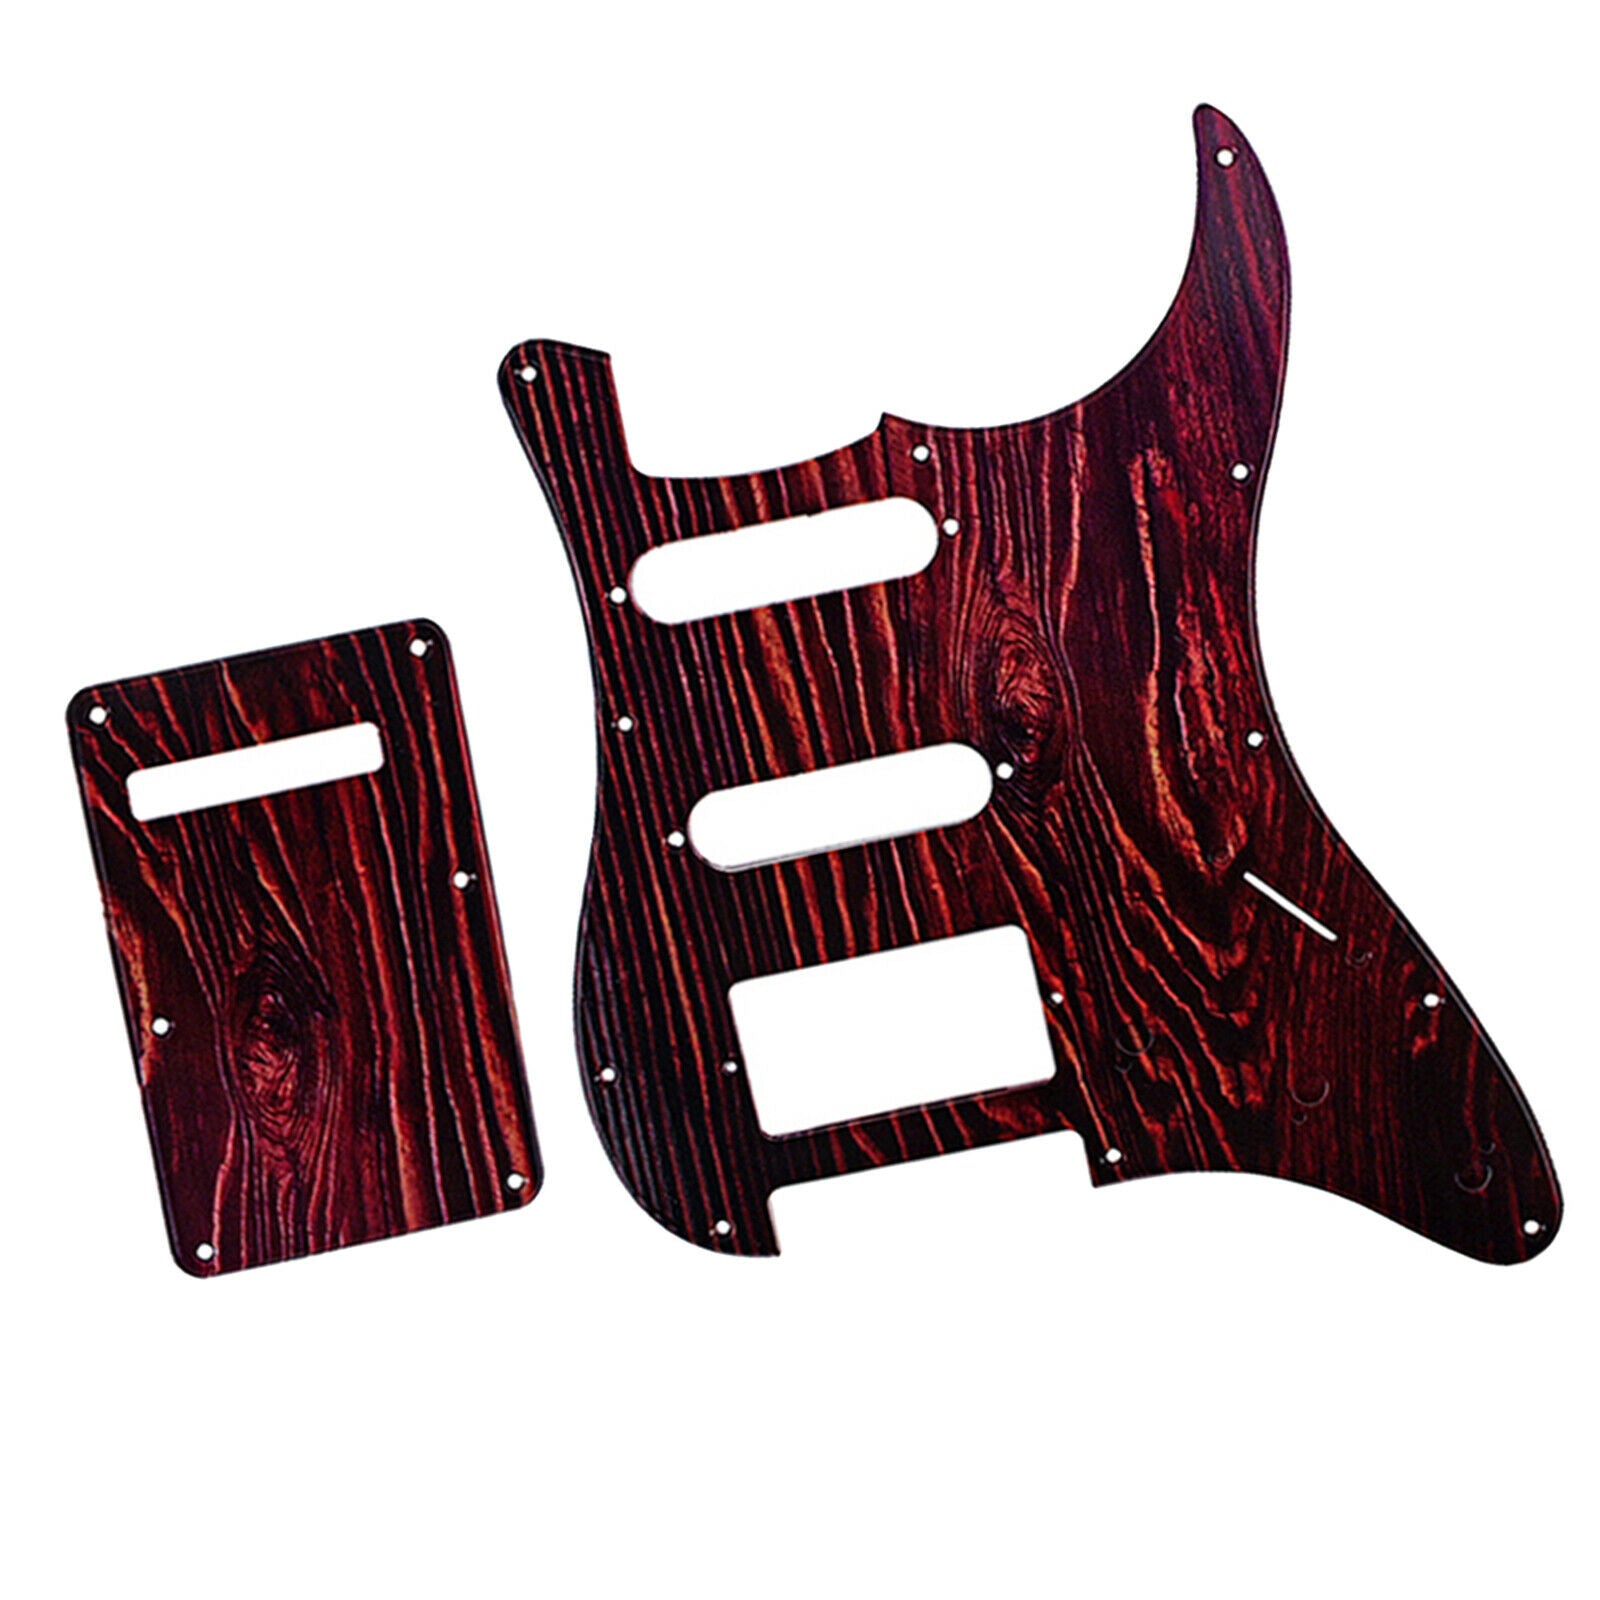 3 Ply Plastic Guitar Pickguard and Back Plate for Yamaha PACIFICA Parts